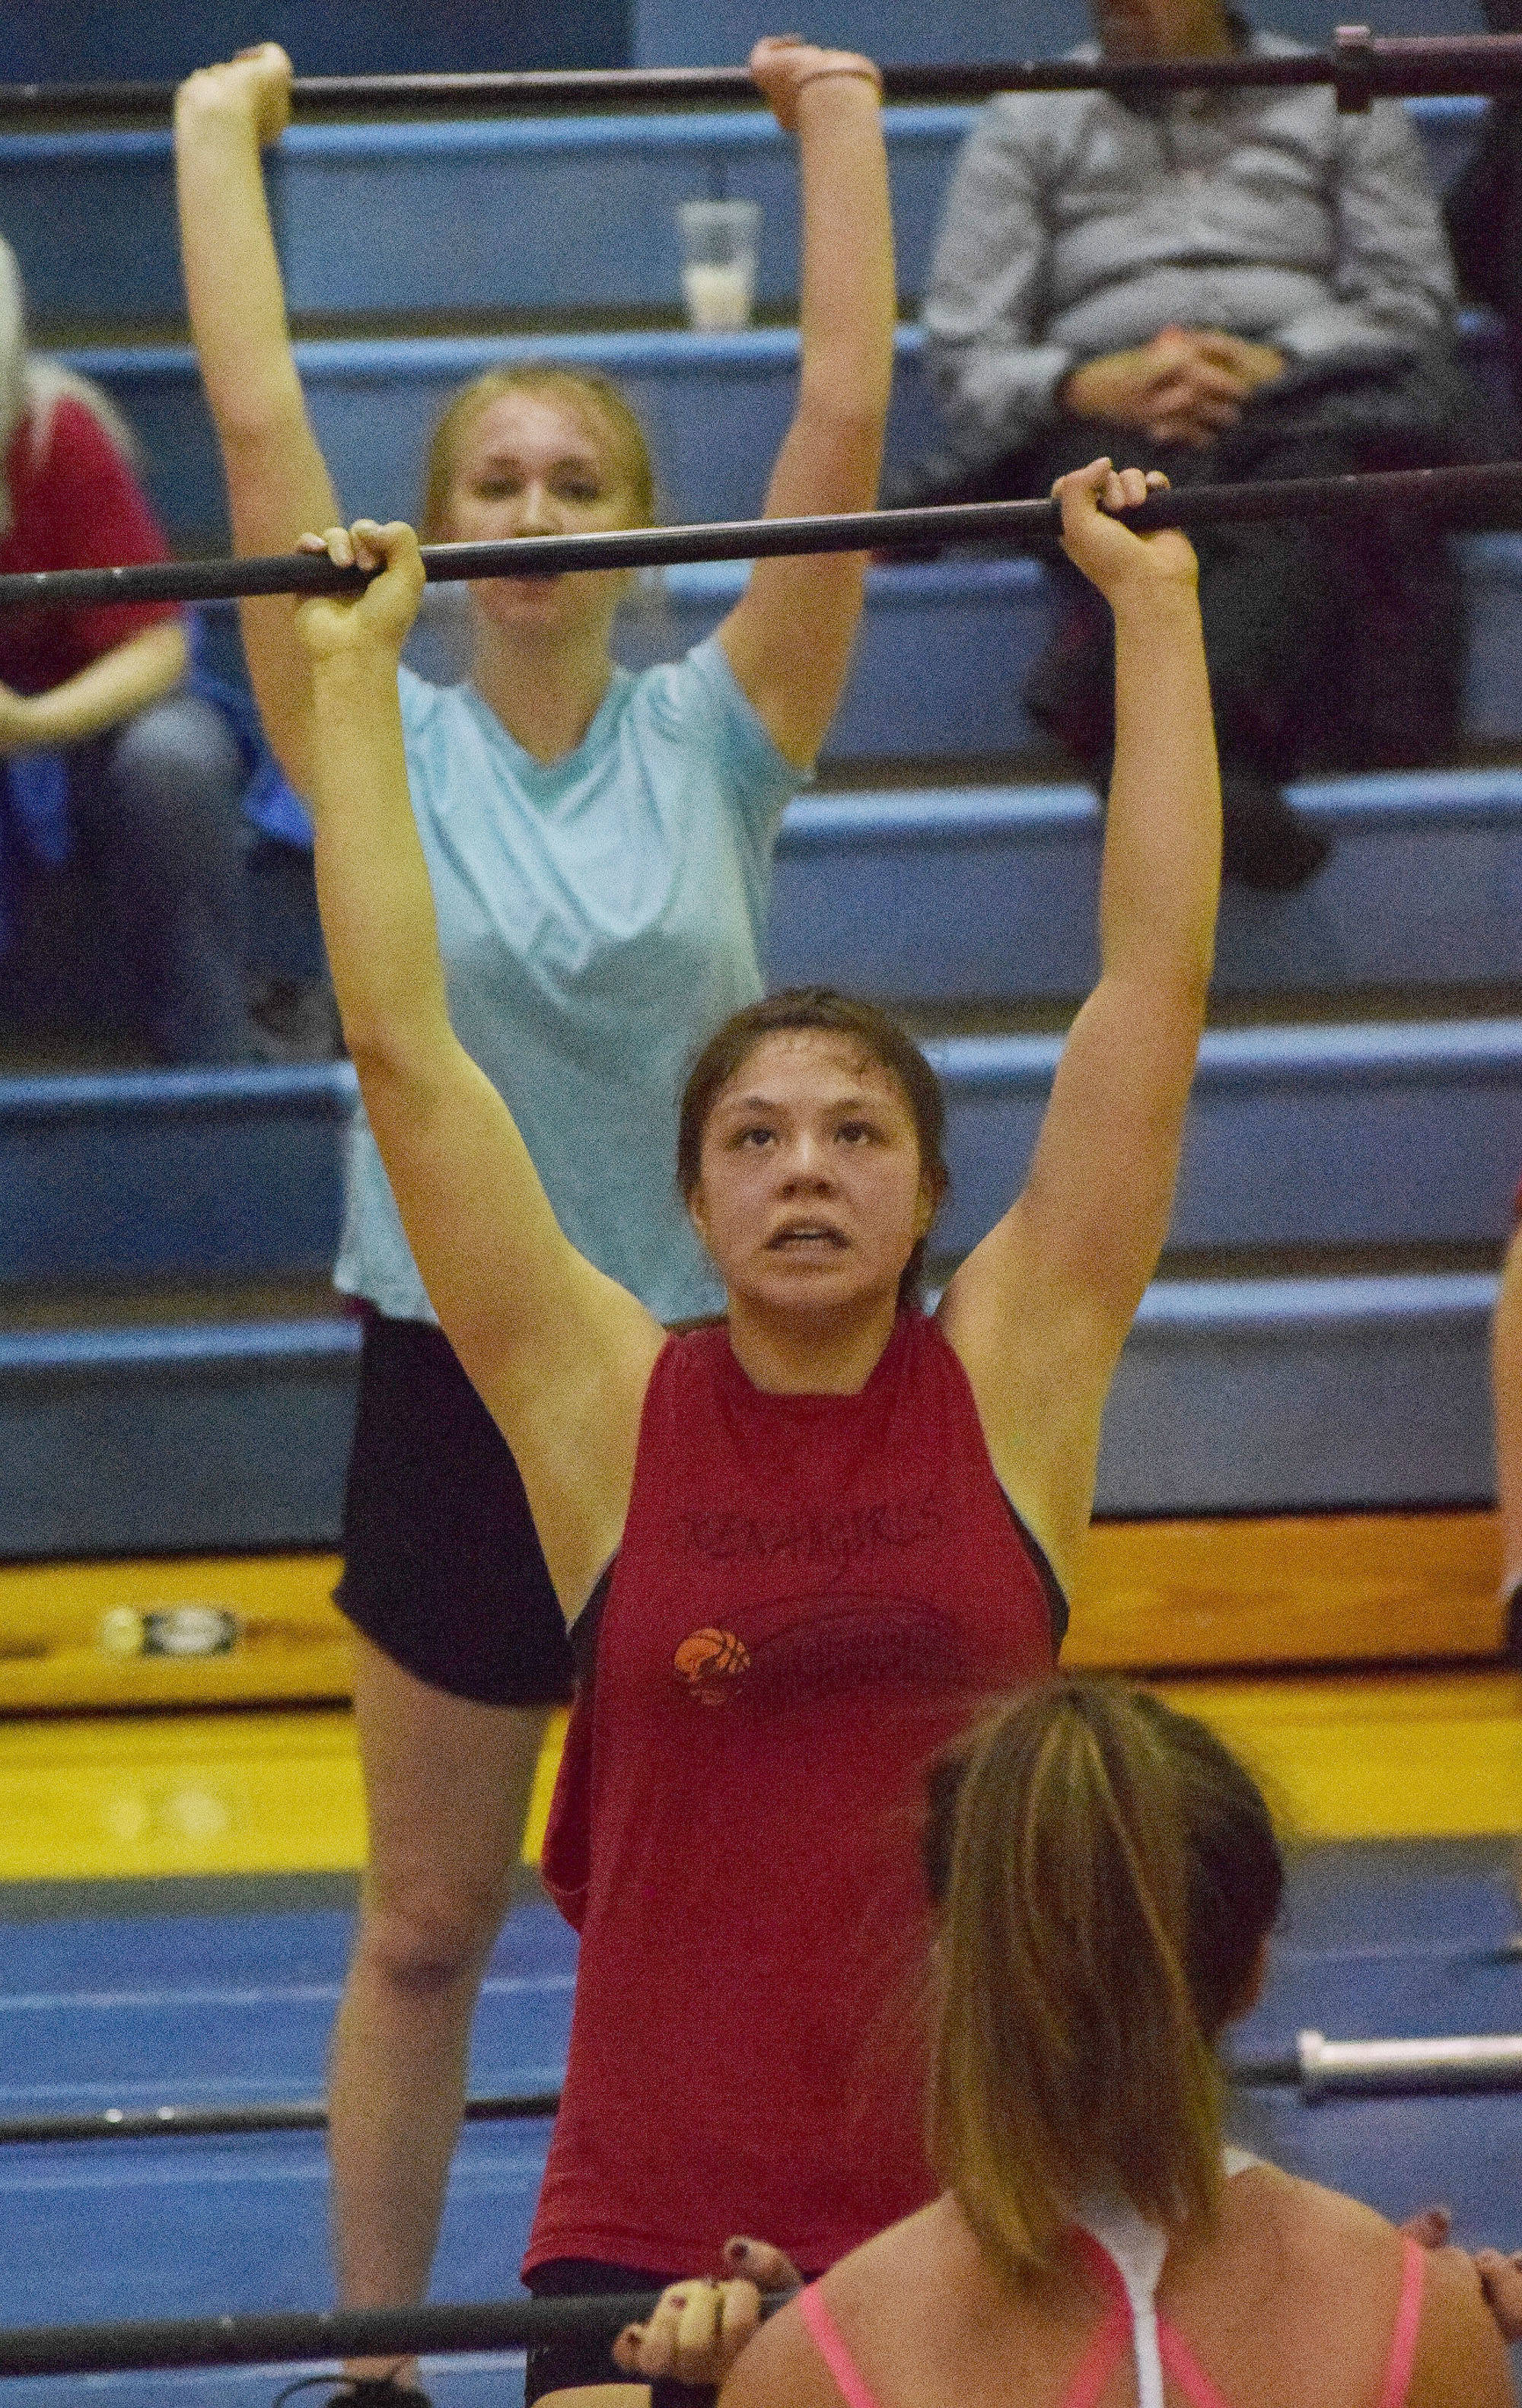 Kenai Central senior Julieanne Wilson (middle) lifts during the Fight Gone Bad event Wednesday evening at the 11th biannual CrossFit Competition at Soldotna High School. (Photo by Joey Klecka/Peninsula Clarion)